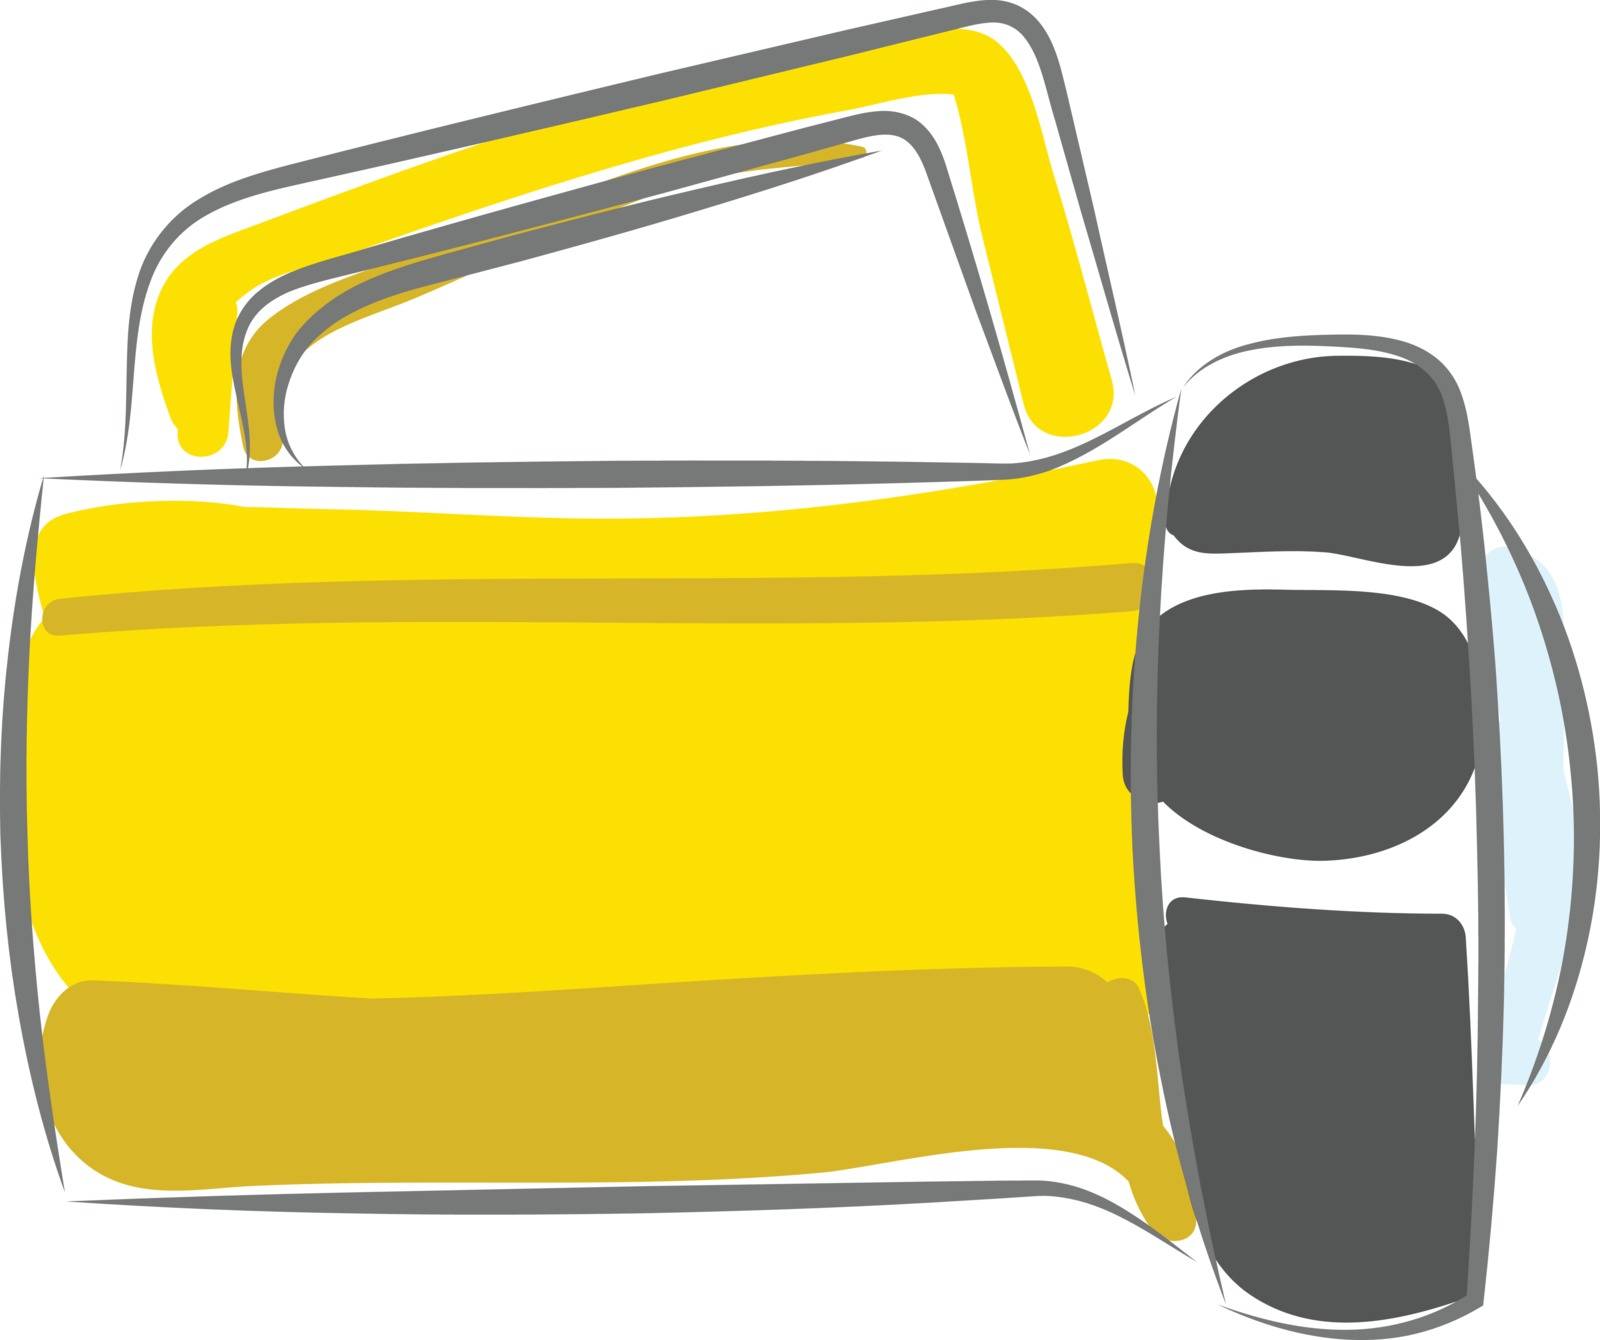 Clipart of a yellow-colored spot light with smart designs and a reflector for brighter light generates focused spotlight when the switch button is turned on, vector, color drawing or illustration. 